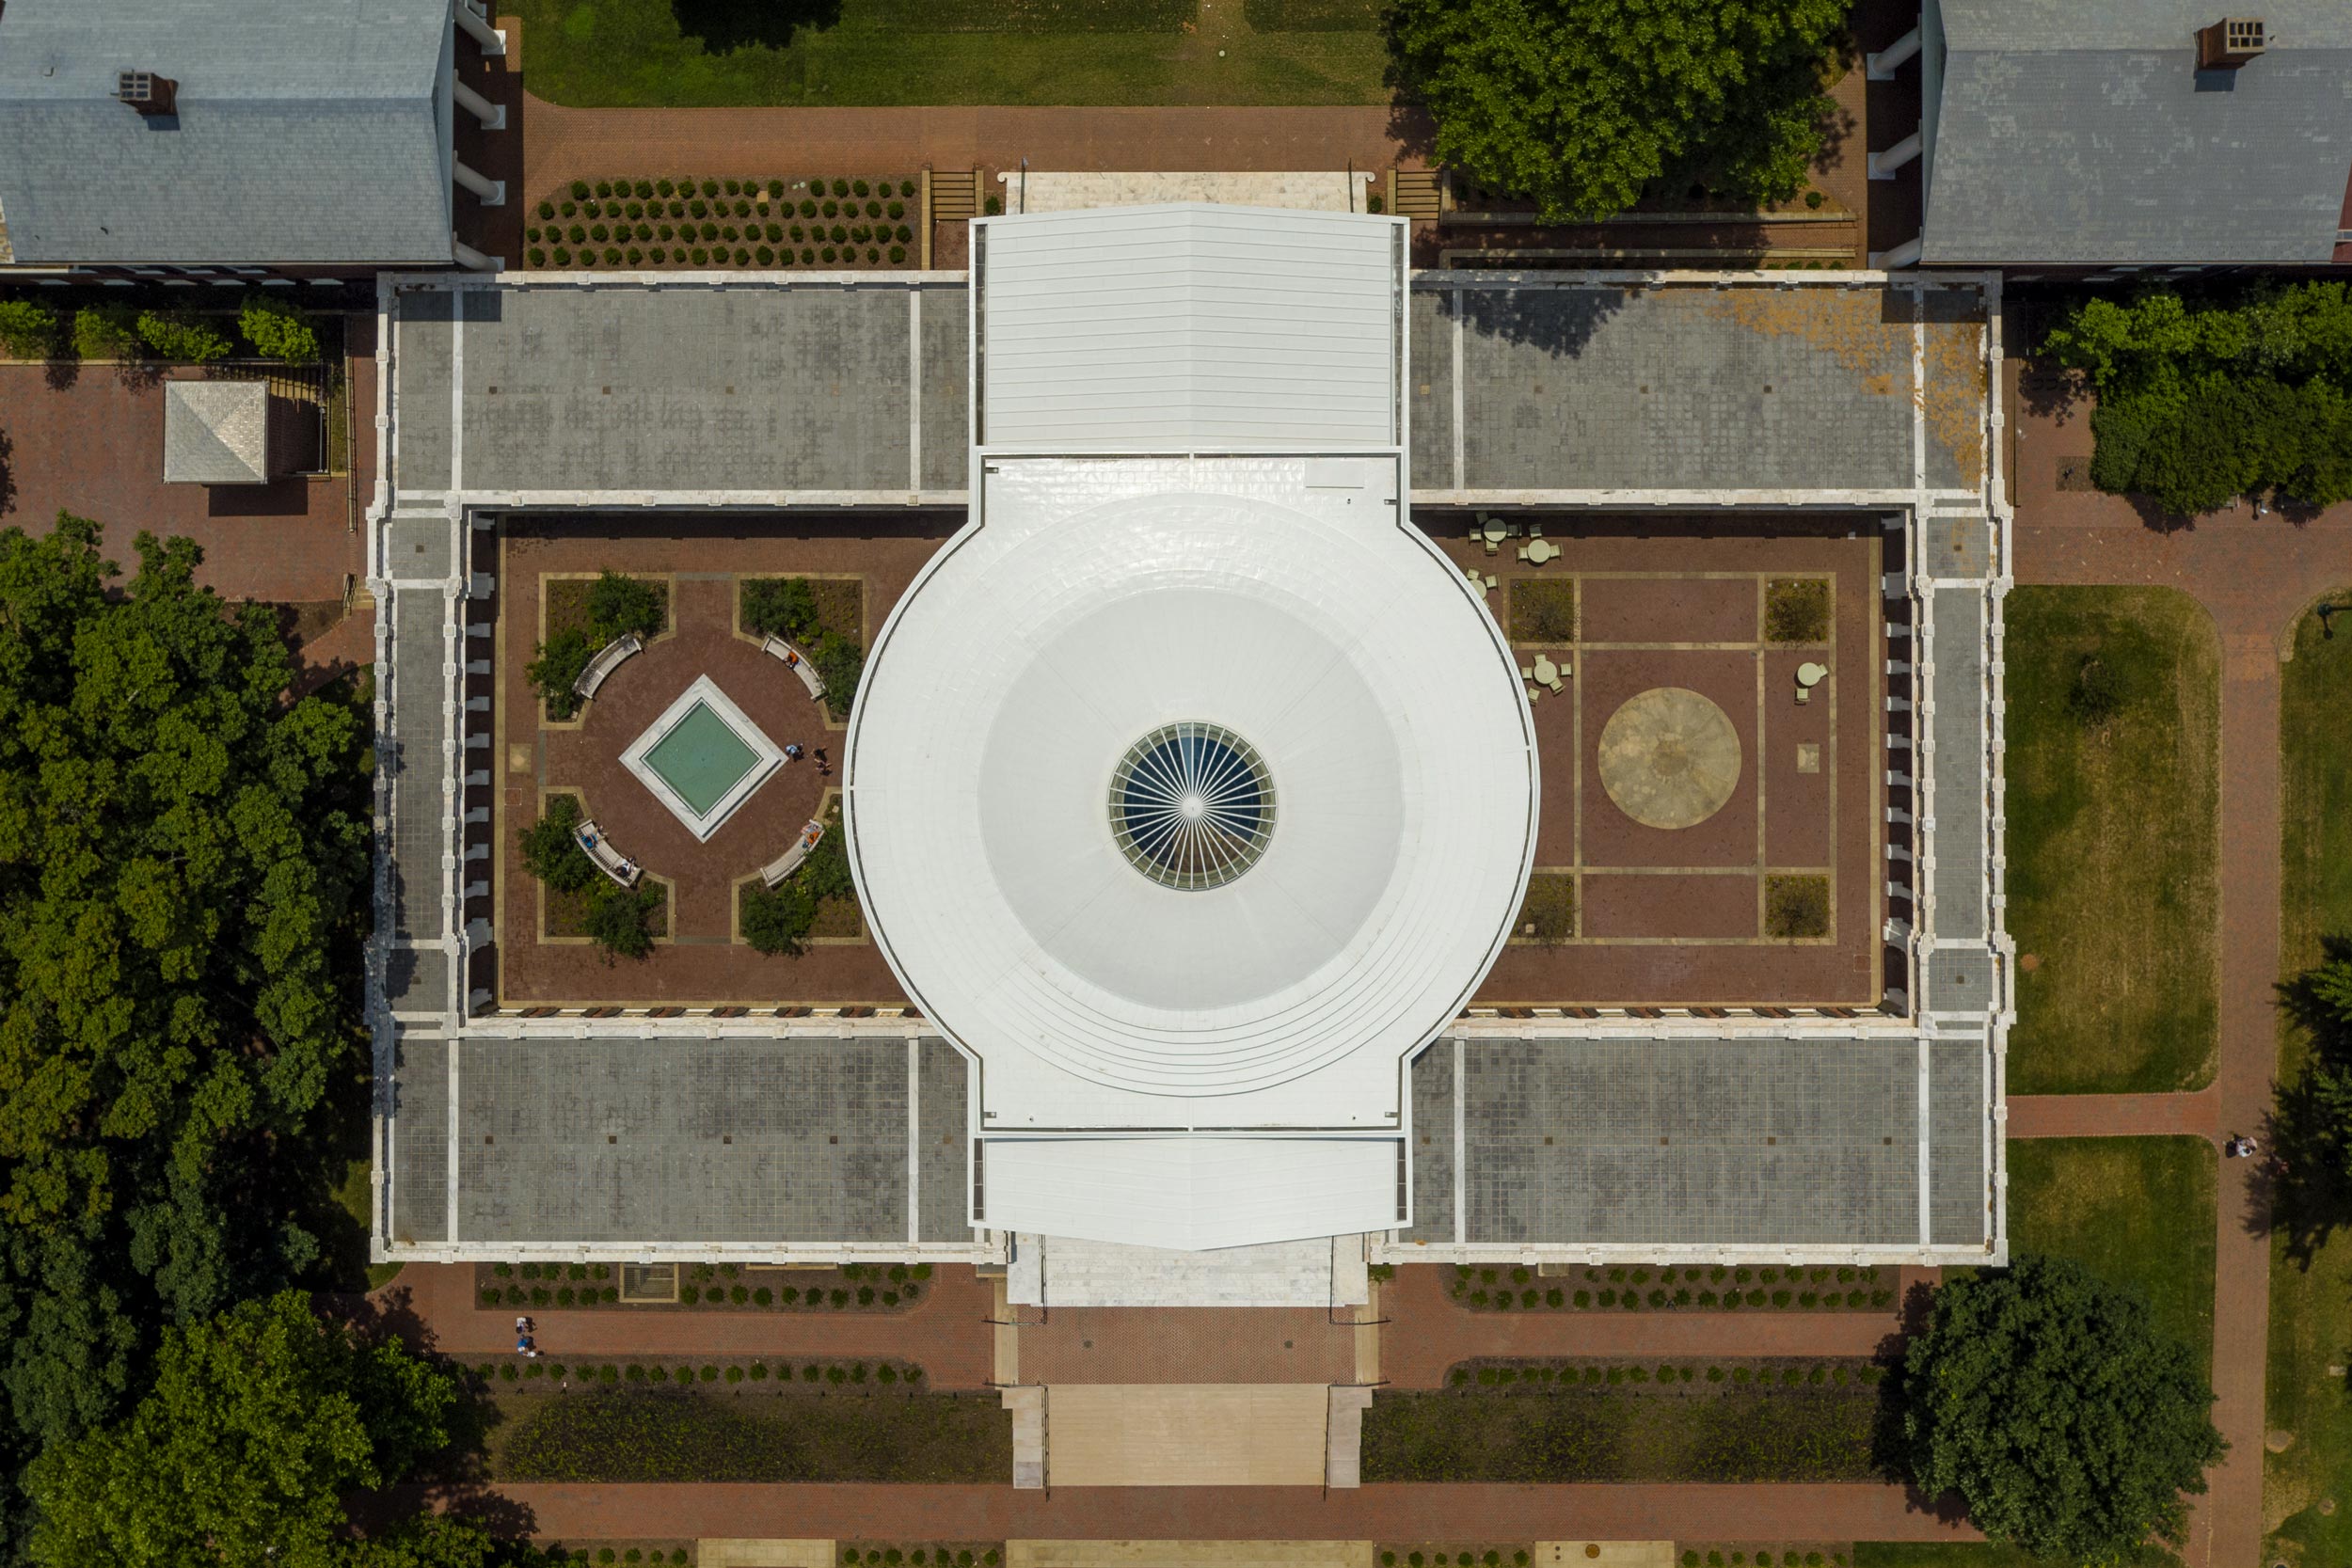 Aerial view of the Rotunda dome and courtyards